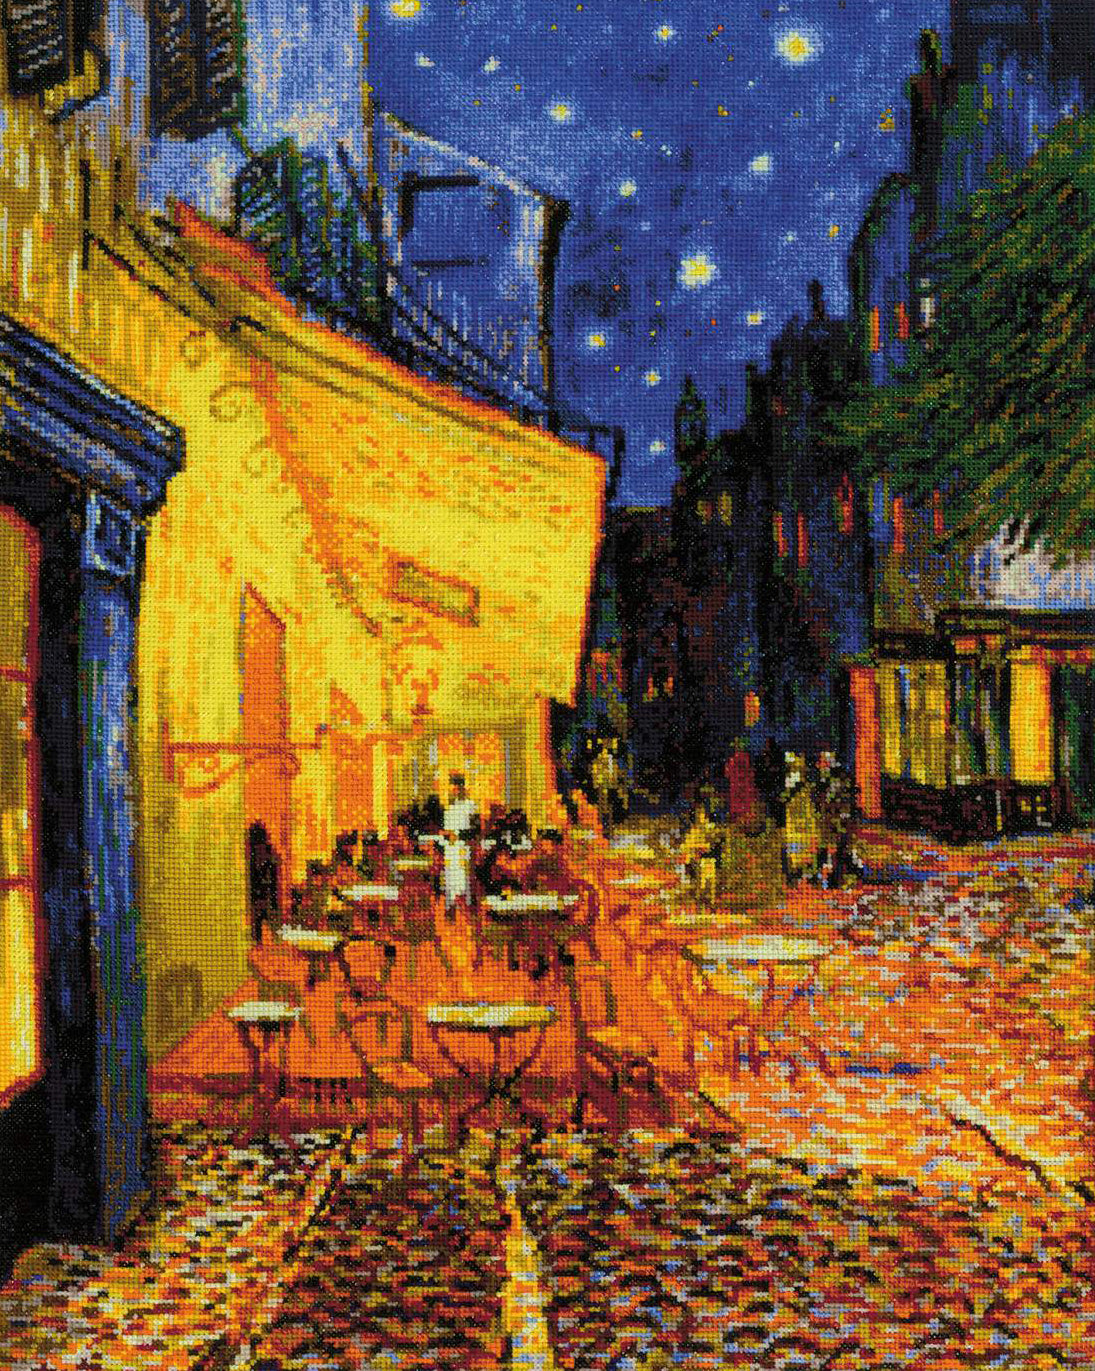 Cross Stitch Kit - "Coffee Terrace at Night based on the Painting by V. Van Gogh" - Riolis 2217